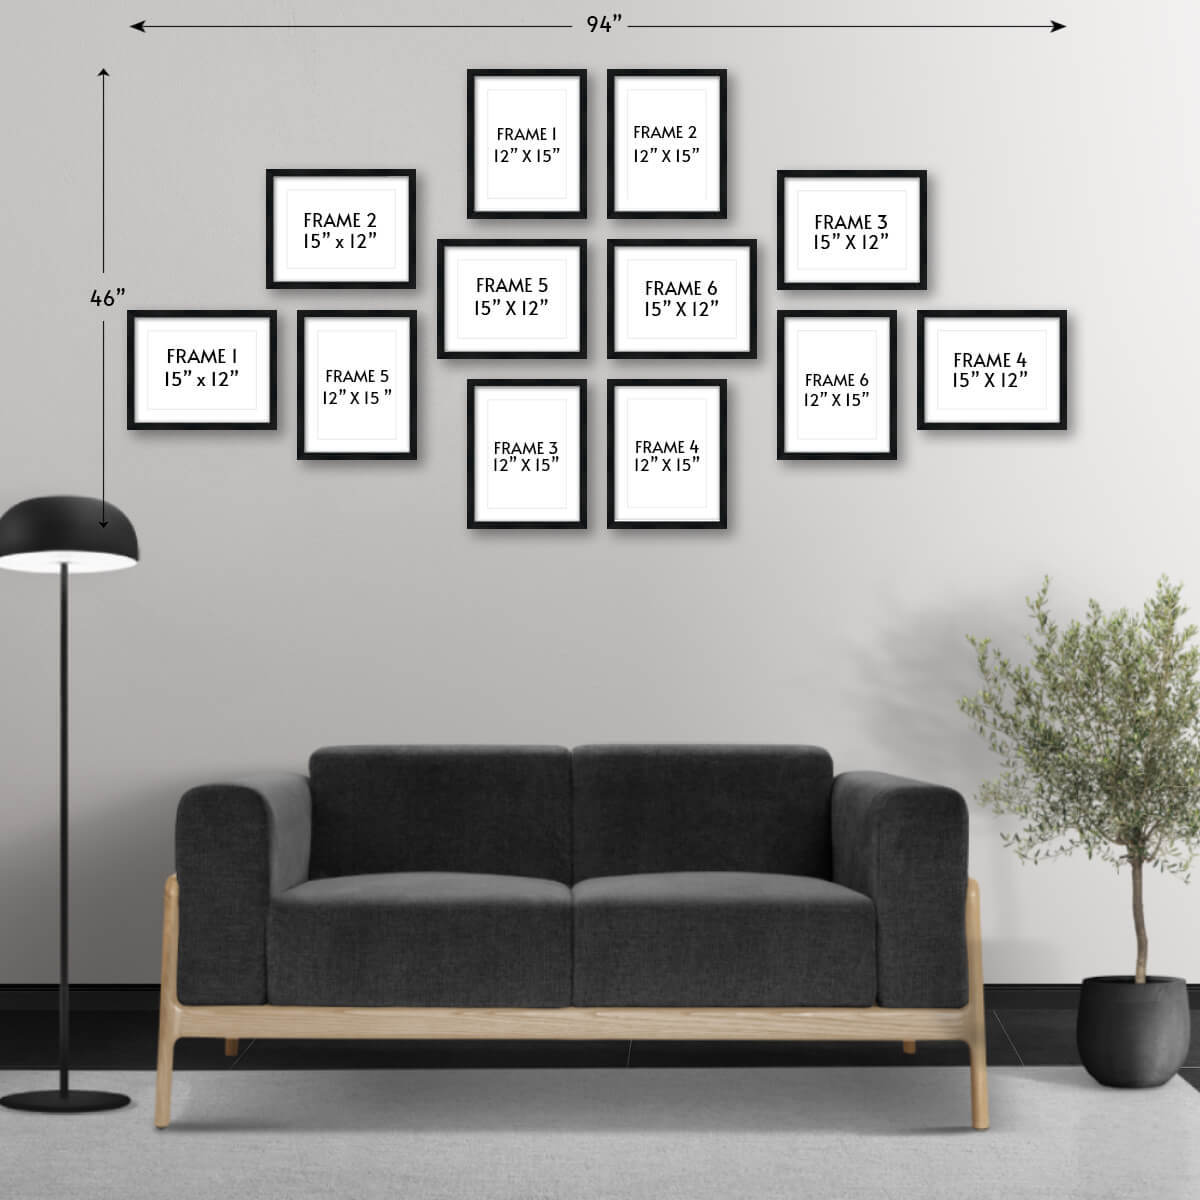 94" x 46" Gallery Wall Wooden Frame (Set of 12)